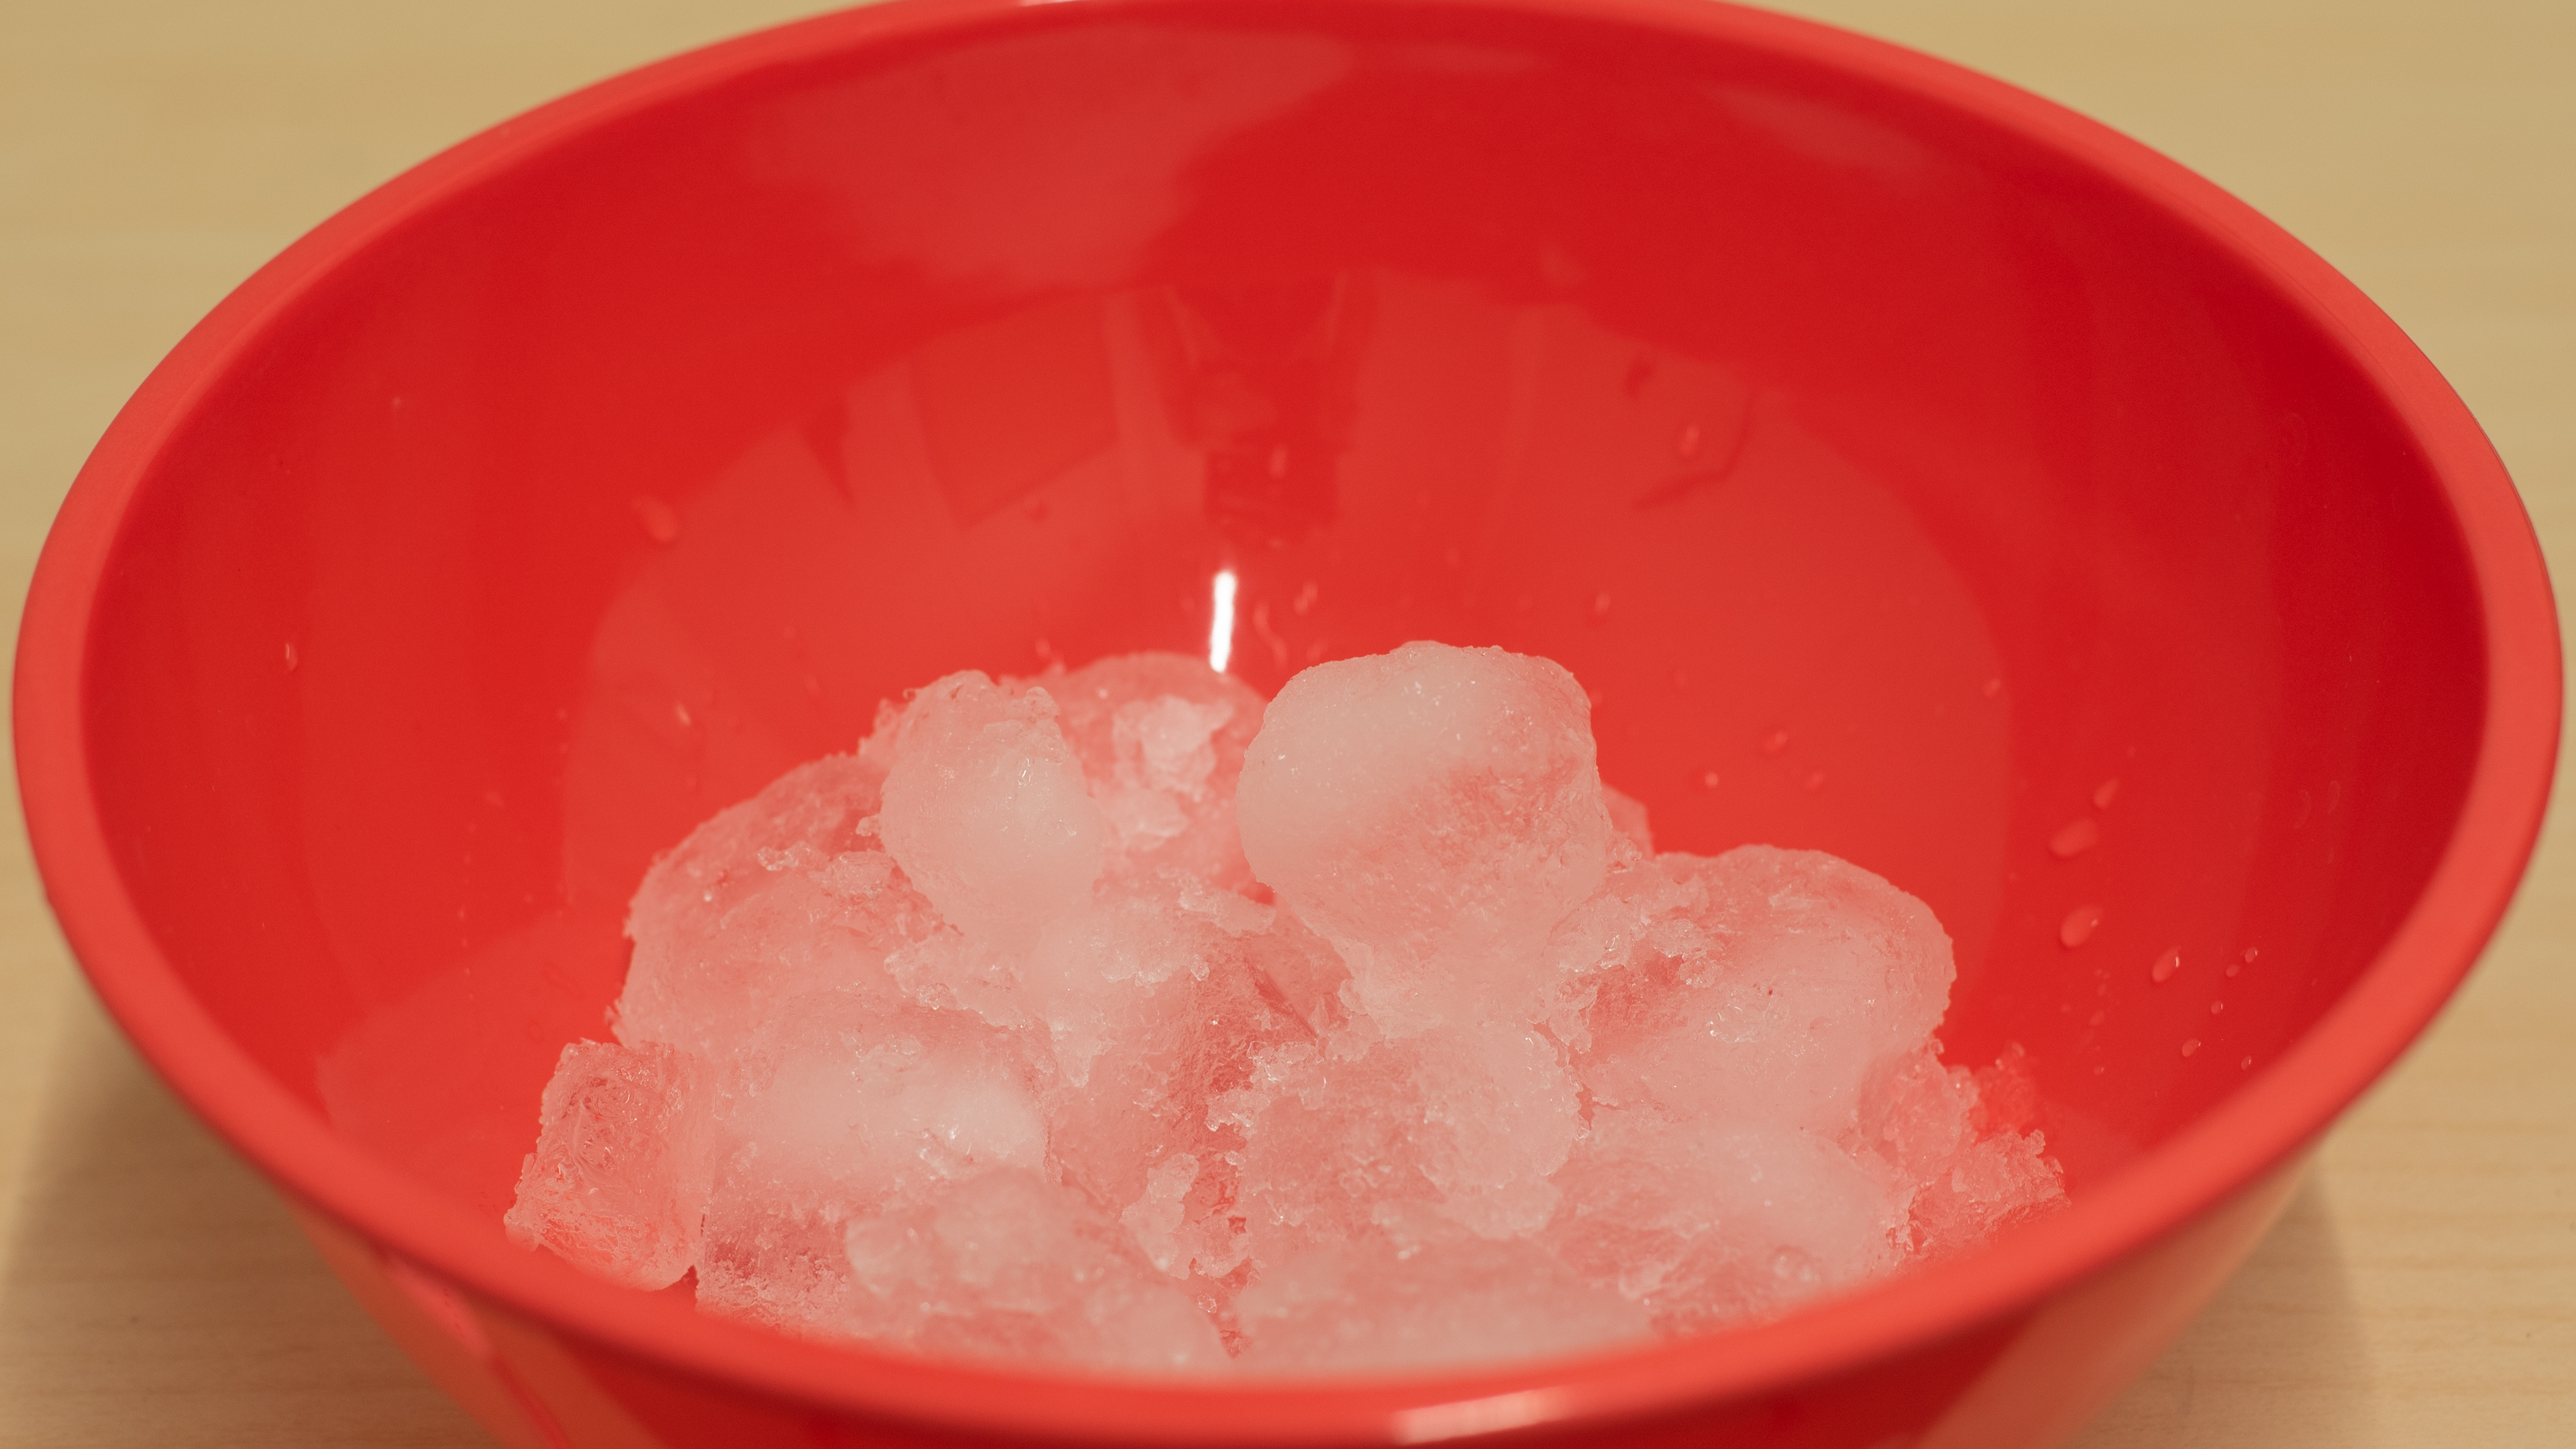 Our Blender Performance Tests: Crushed Ice 